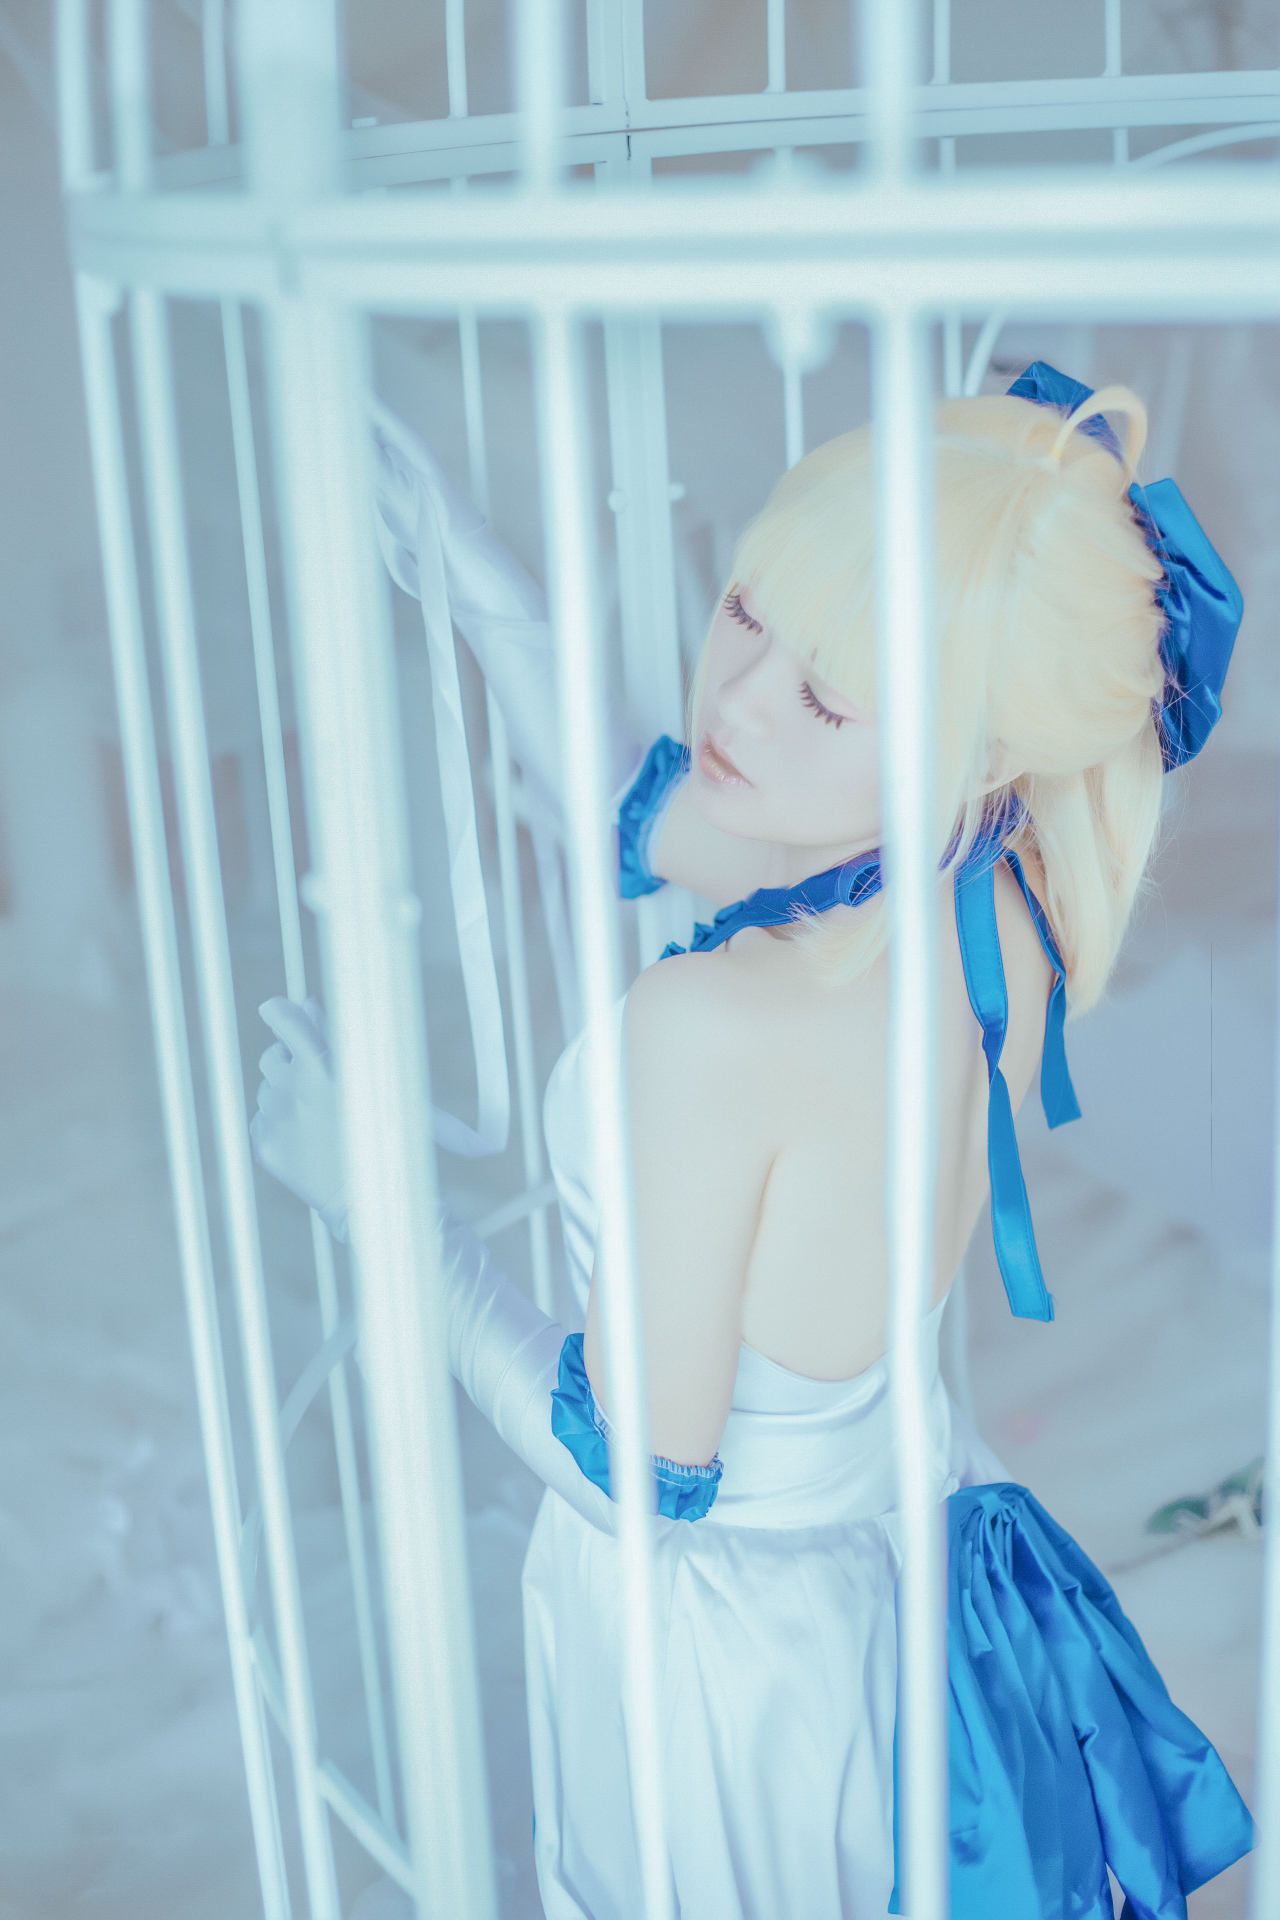 lily|saber lily蓝百合cosplay